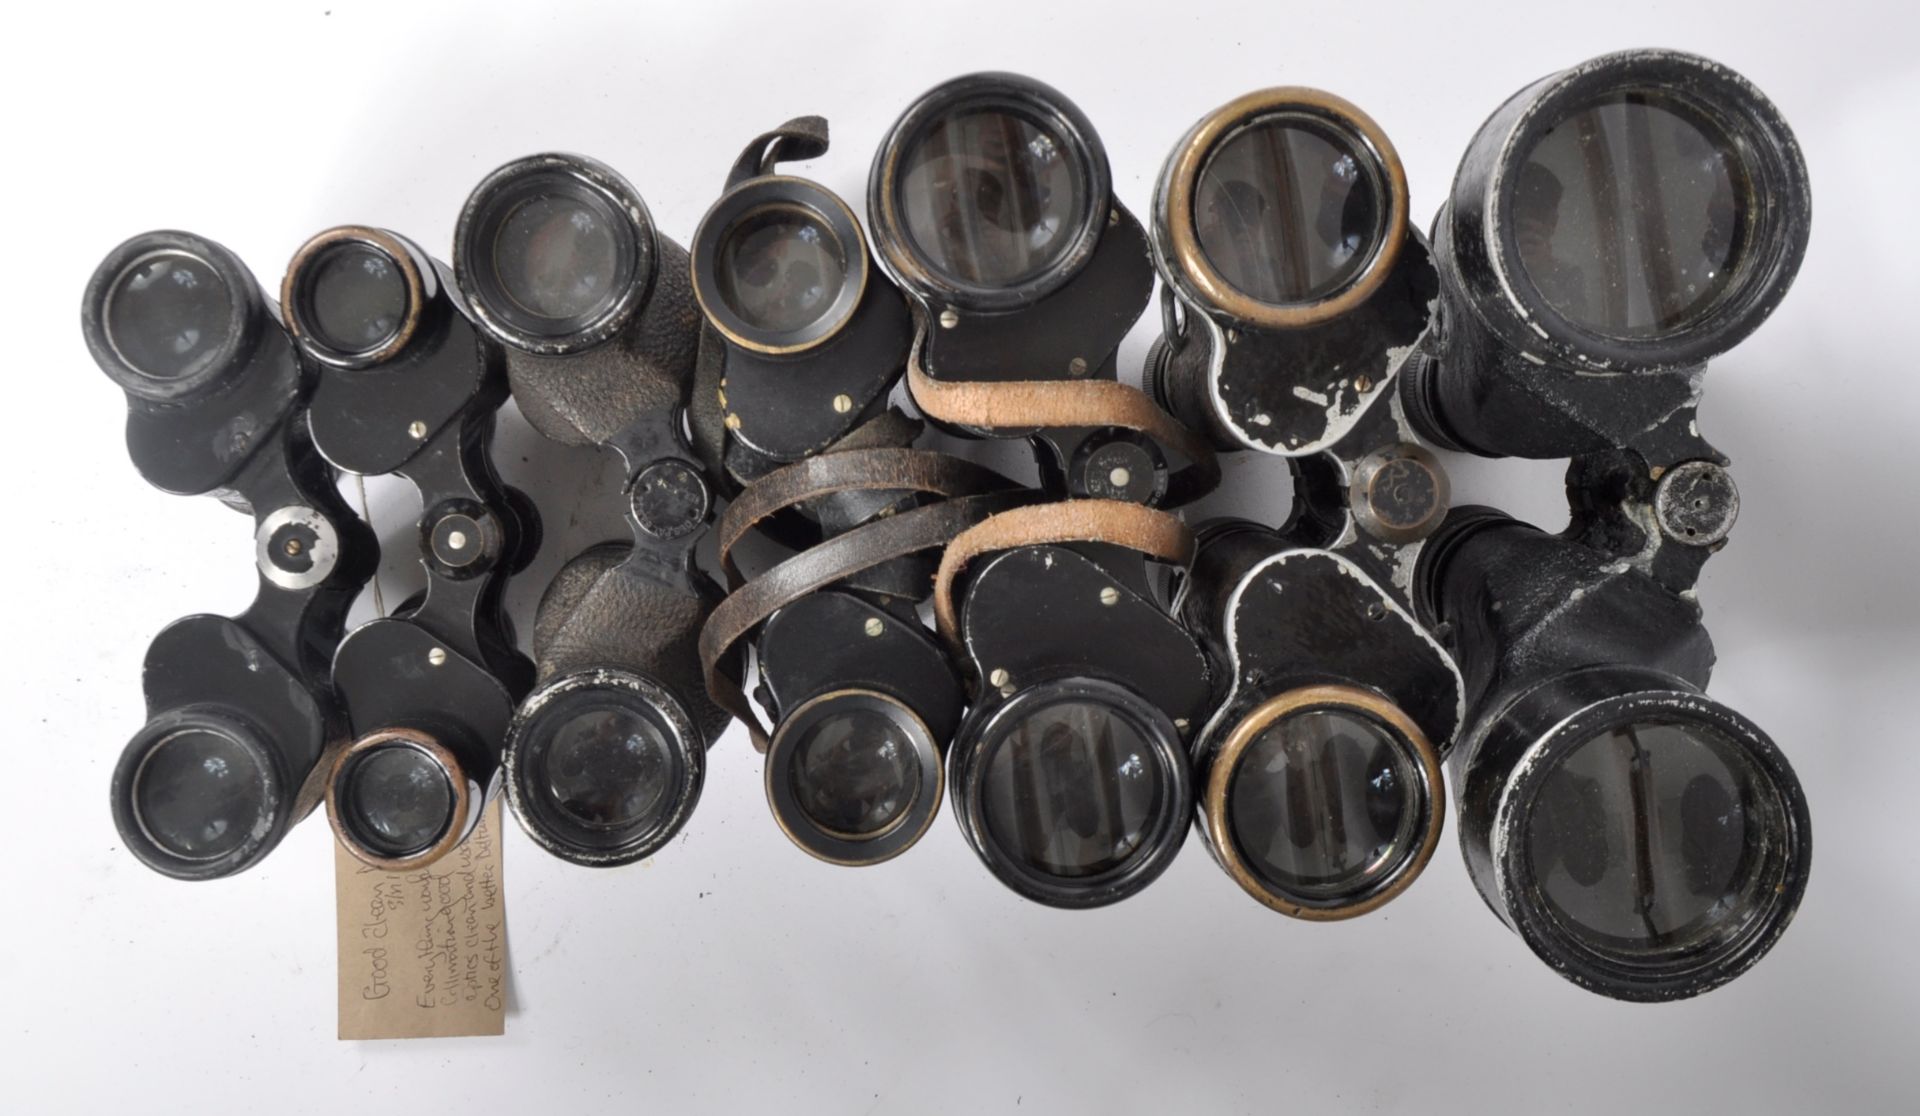 MIXED COLLECTION OF VINTAGE BINOCULARS - Image 4 of 5